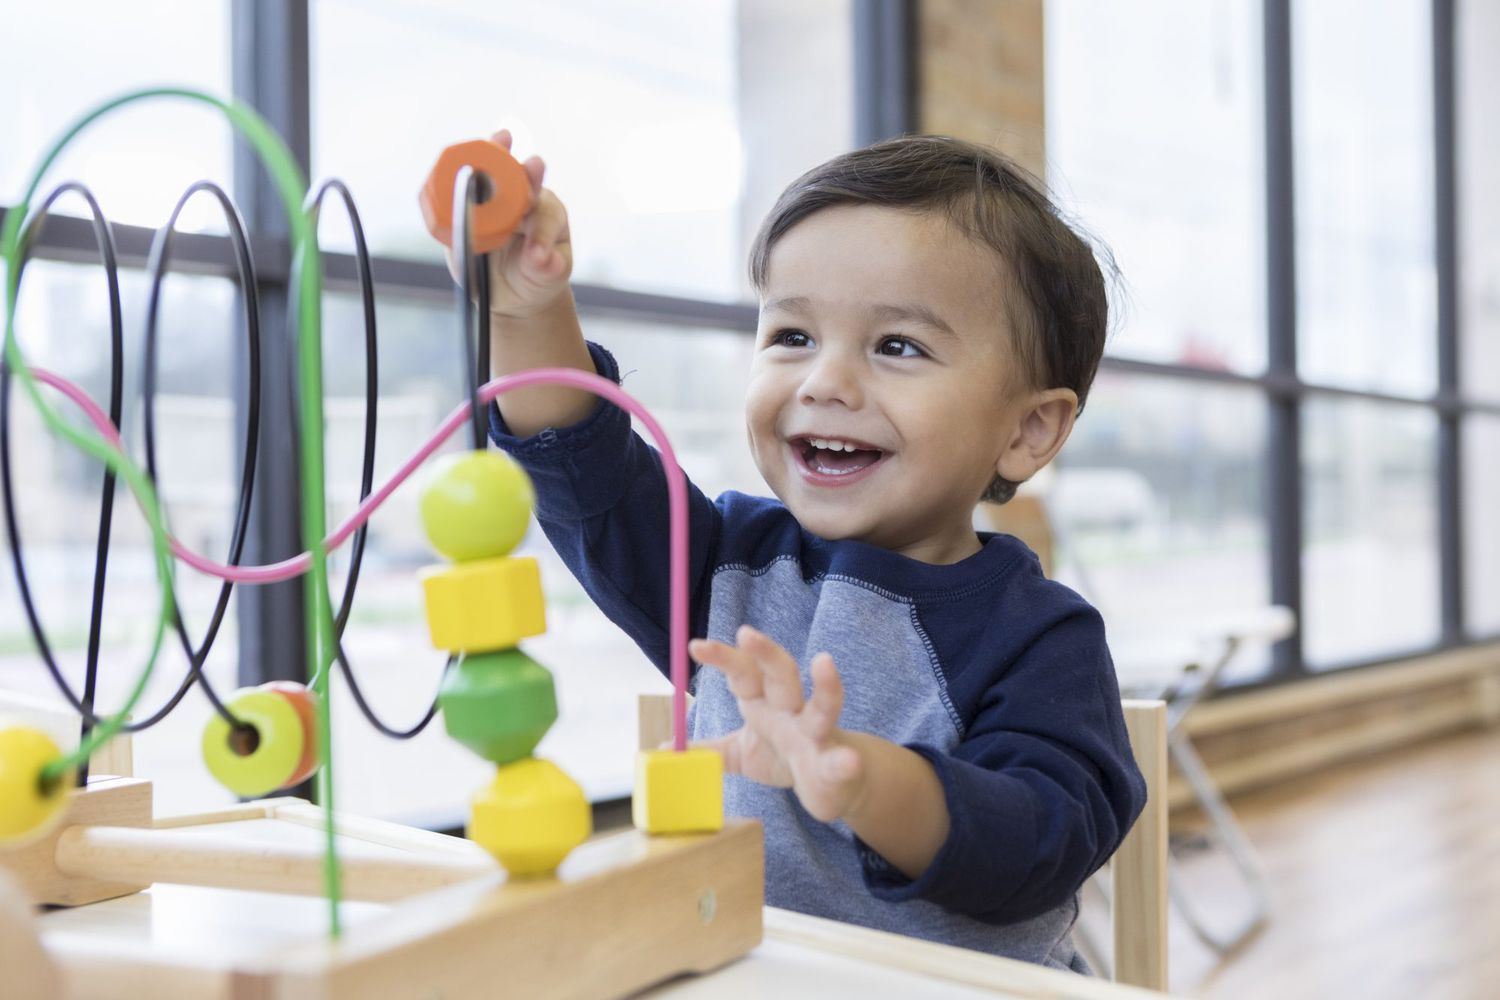 Toddler boy enjoys playing with toys in waiting room